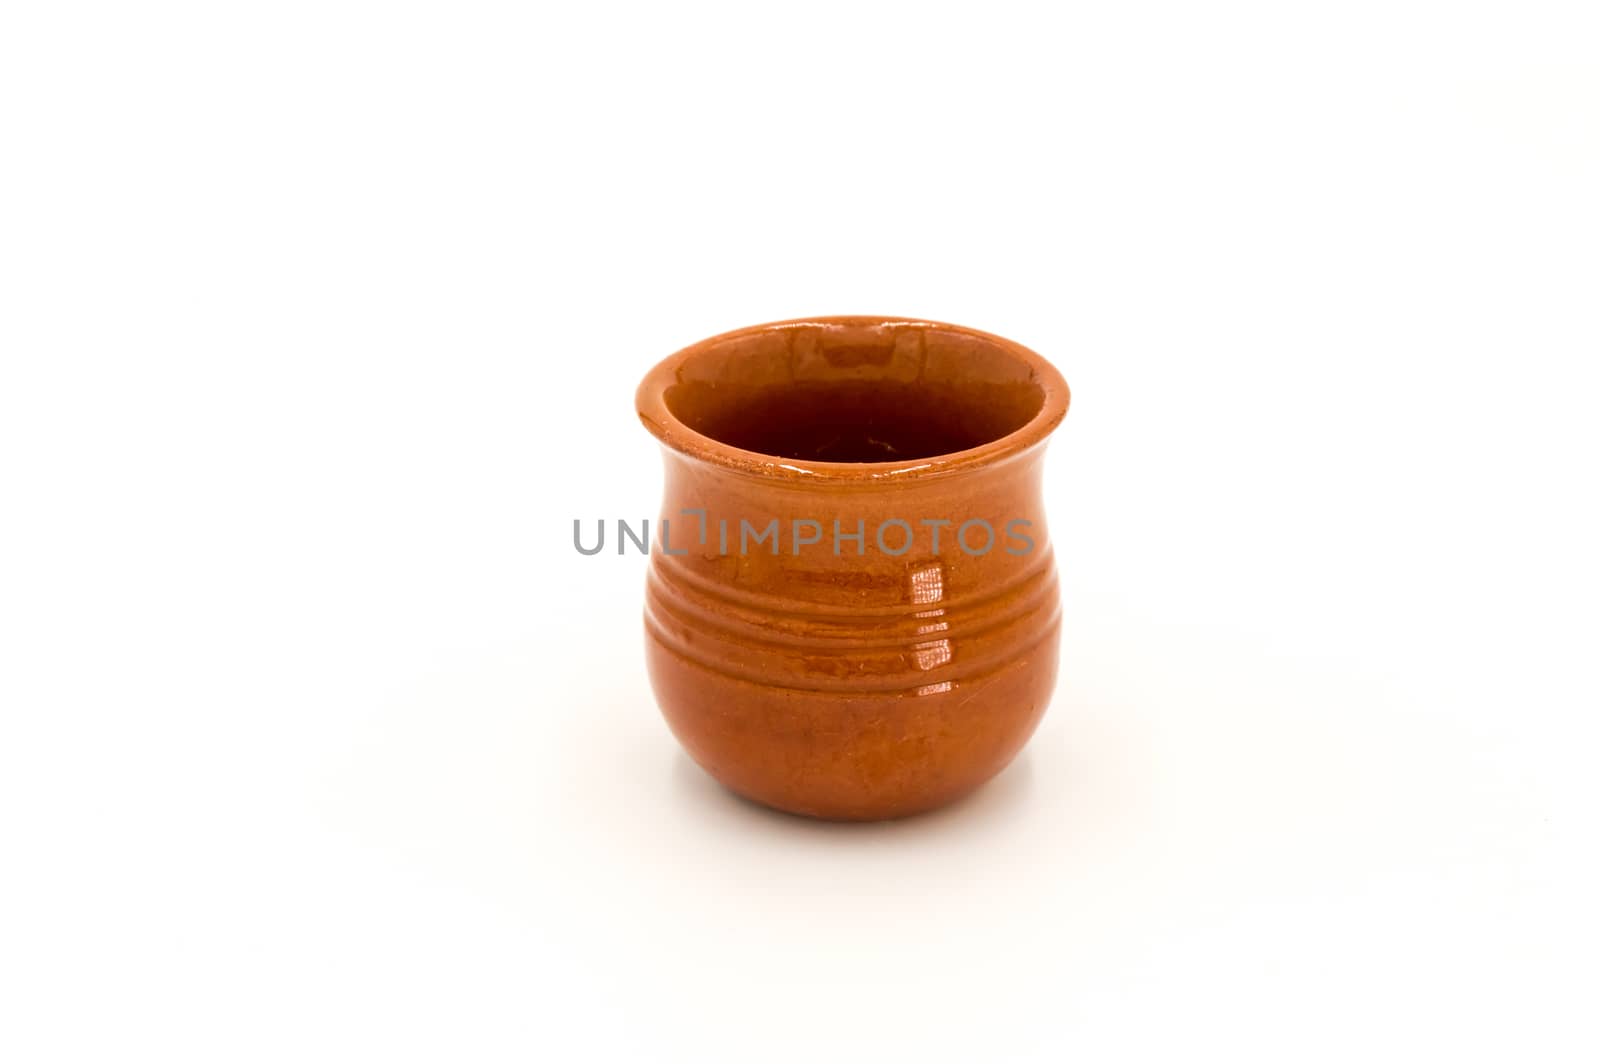 Porcelain puffed ramekin dish in brown color isolated on white background